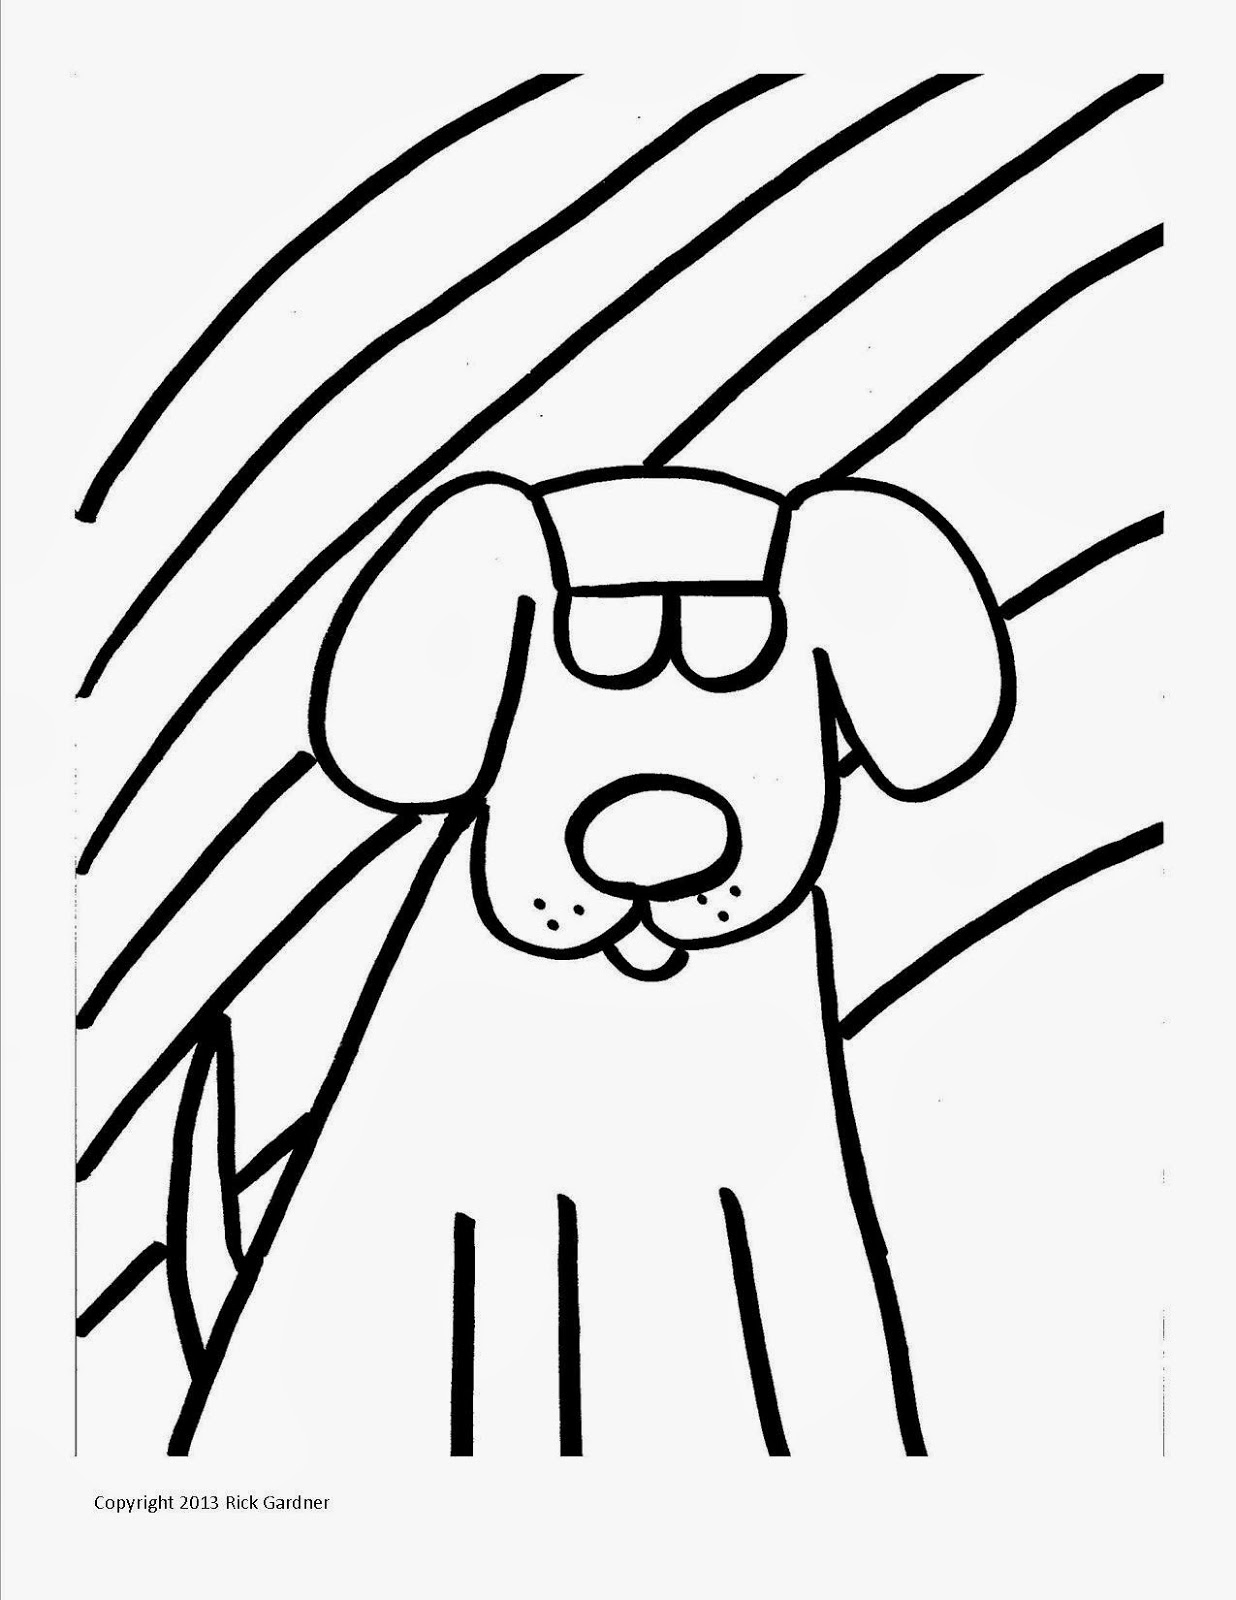 Apex Lazy Dog Blog: Advent Lazy Dog Coloring Page #16